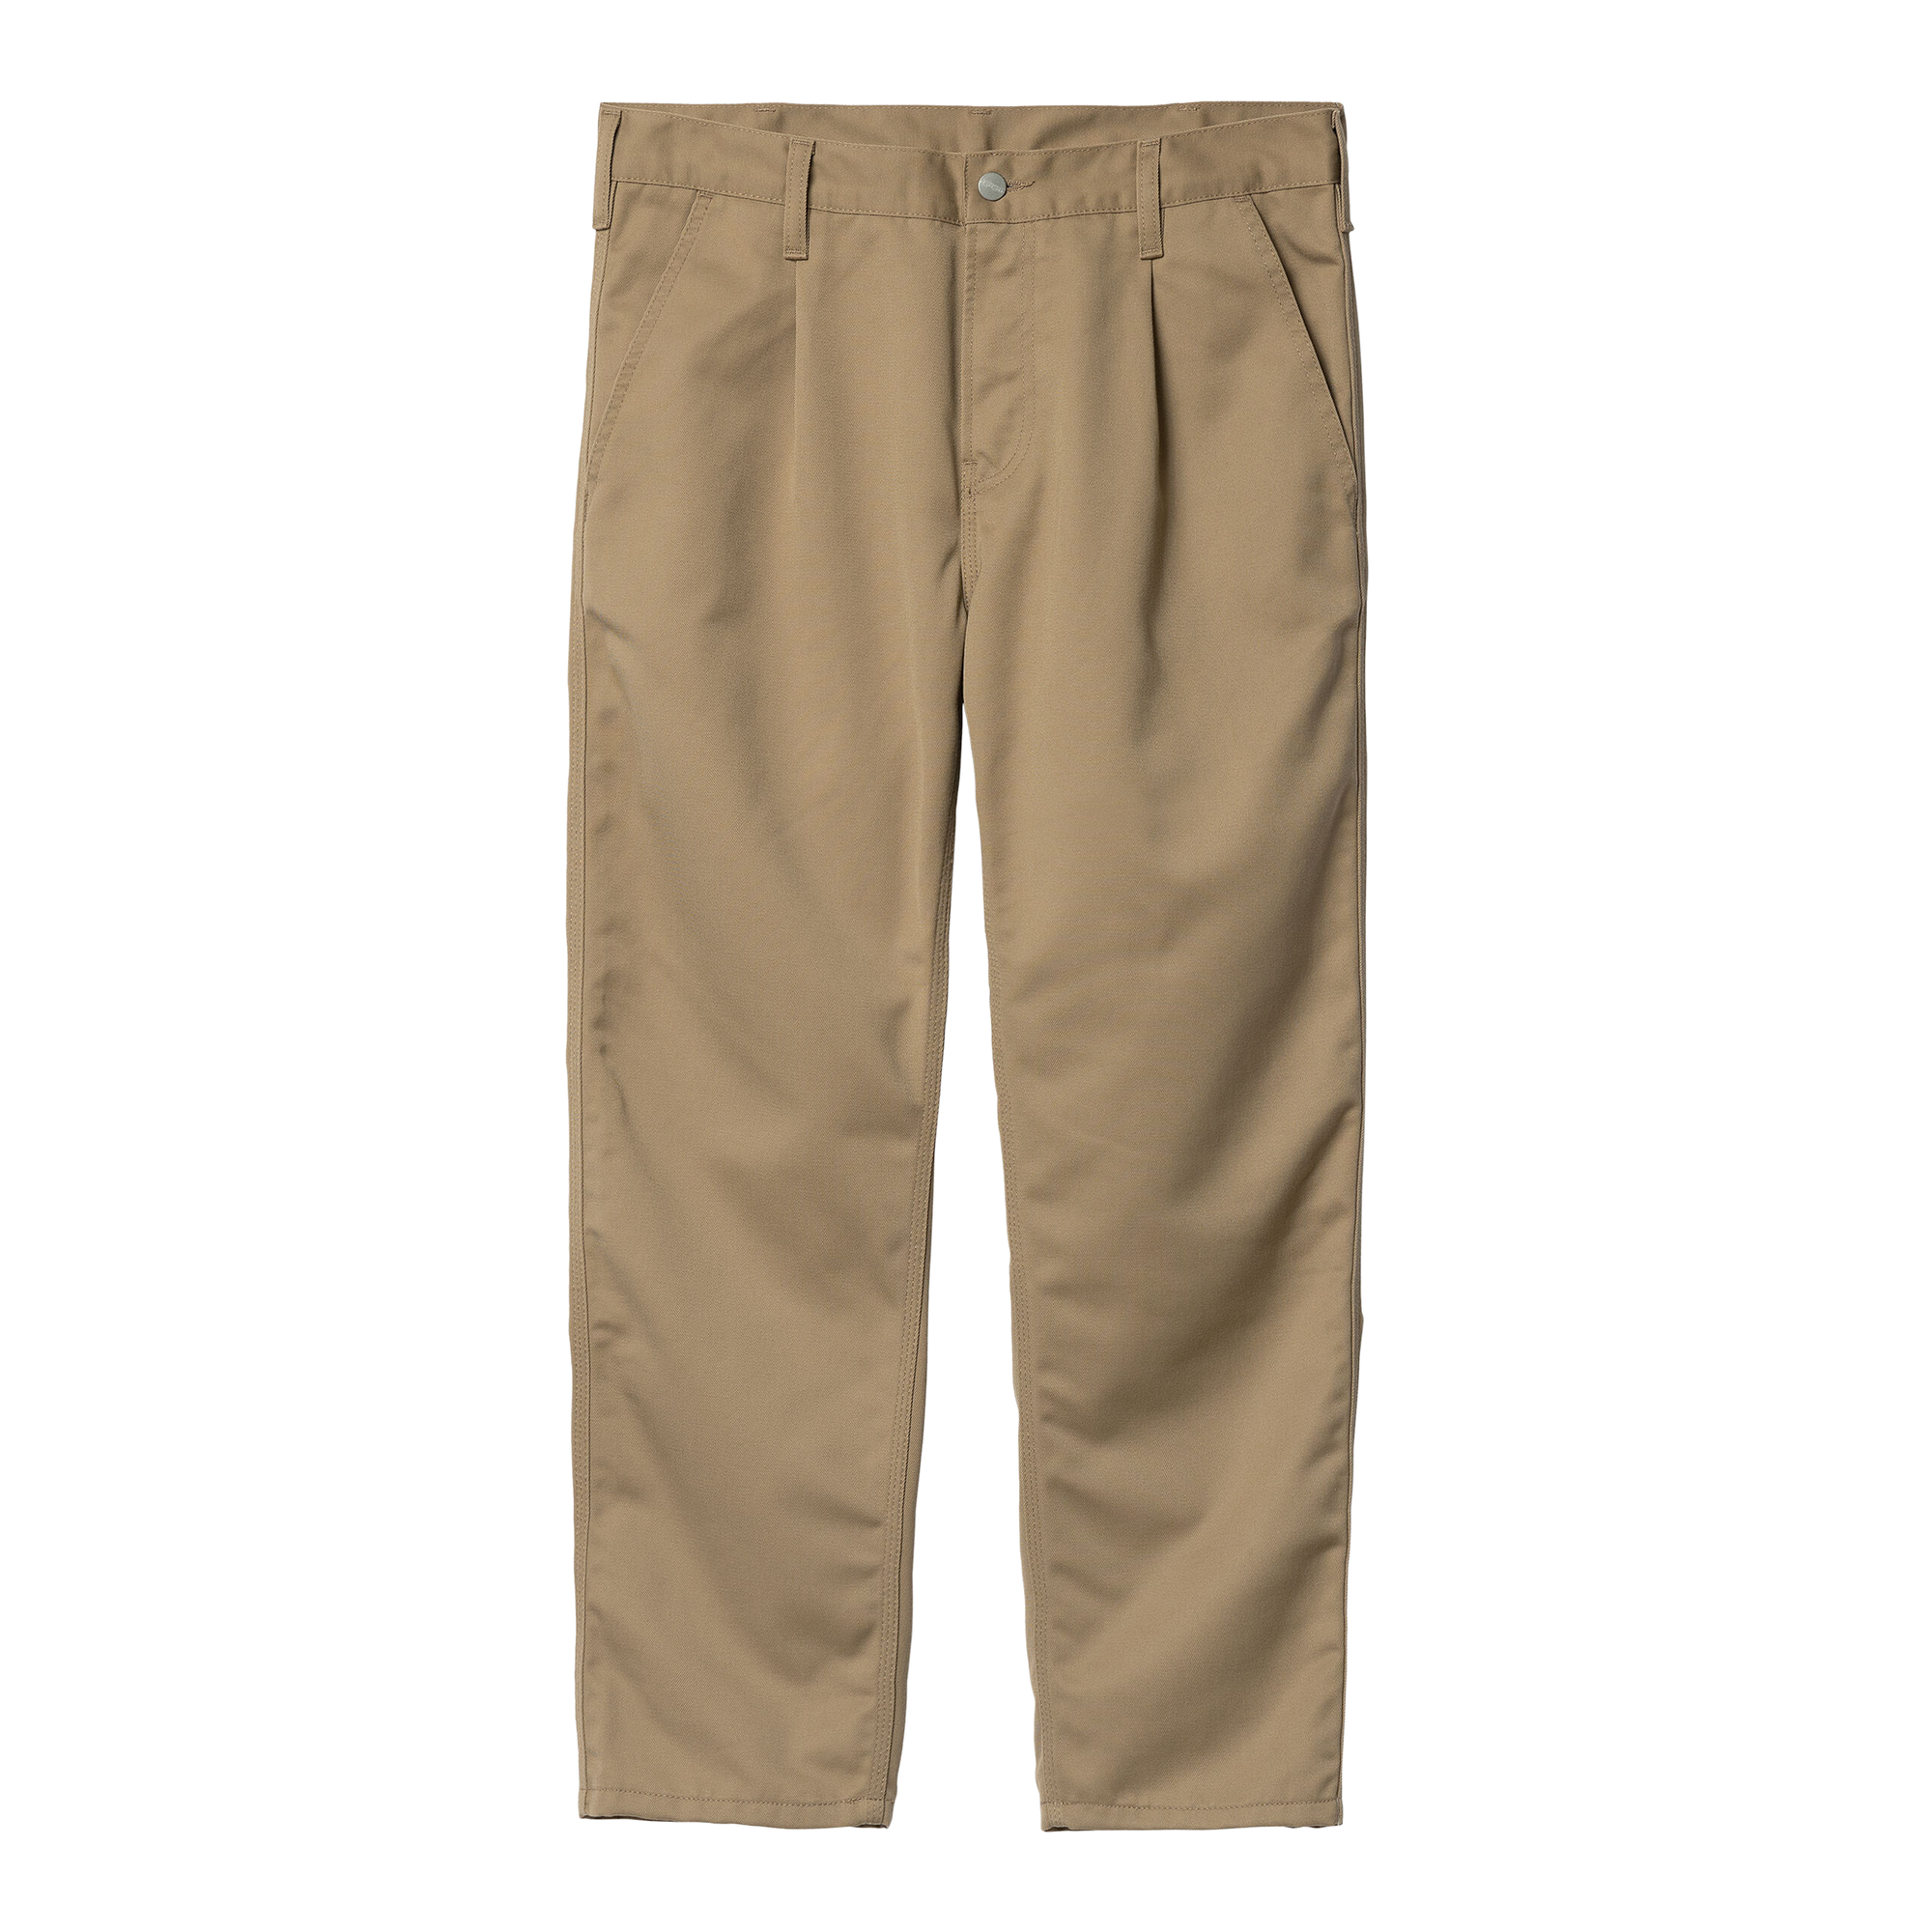 Carhartt WIP Abbott Pant (leather stoned washed) - Blue Mountain Store